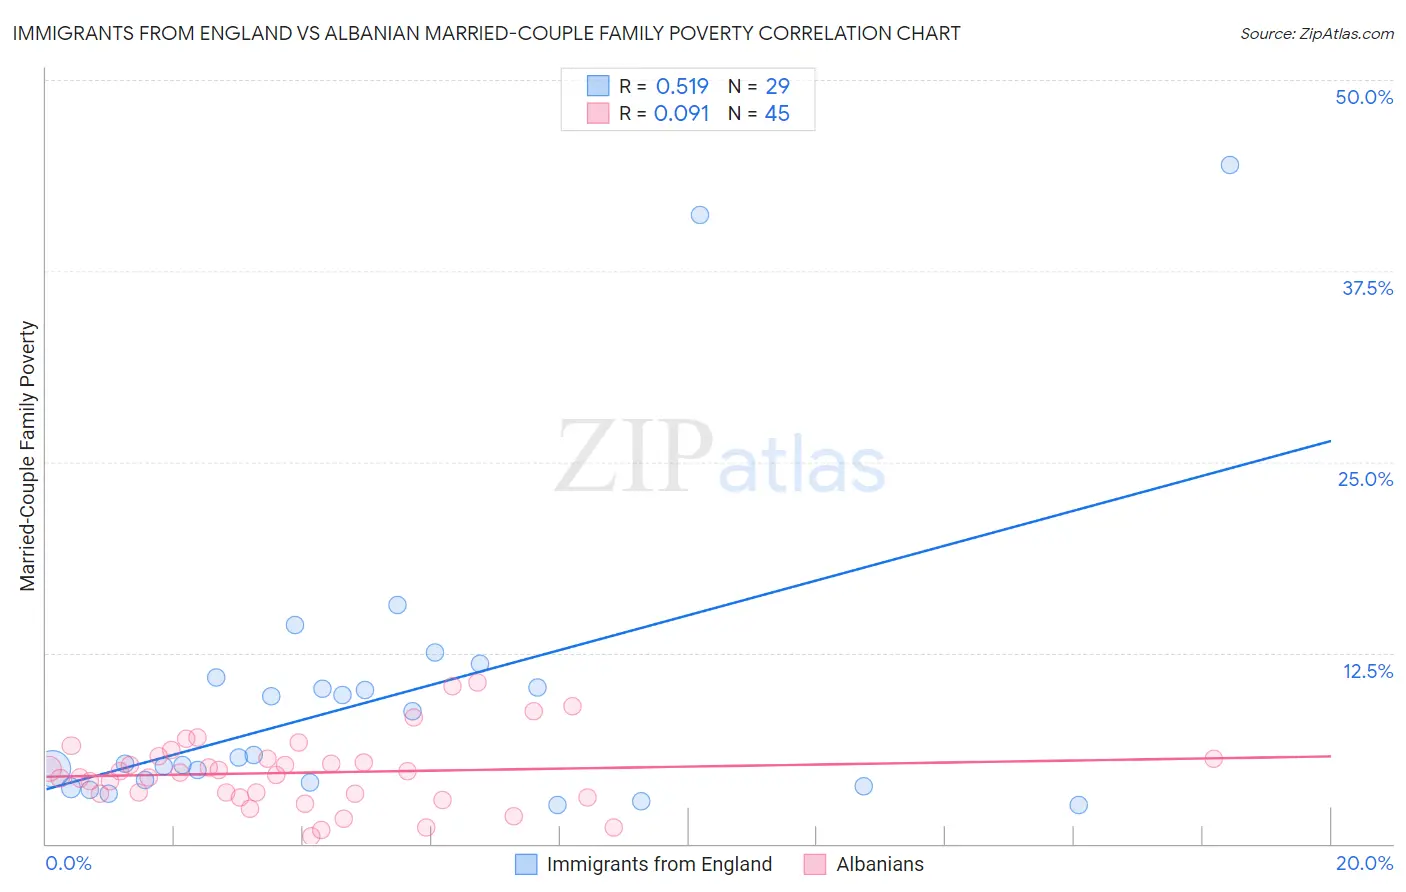 Immigrants from England vs Albanian Married-Couple Family Poverty